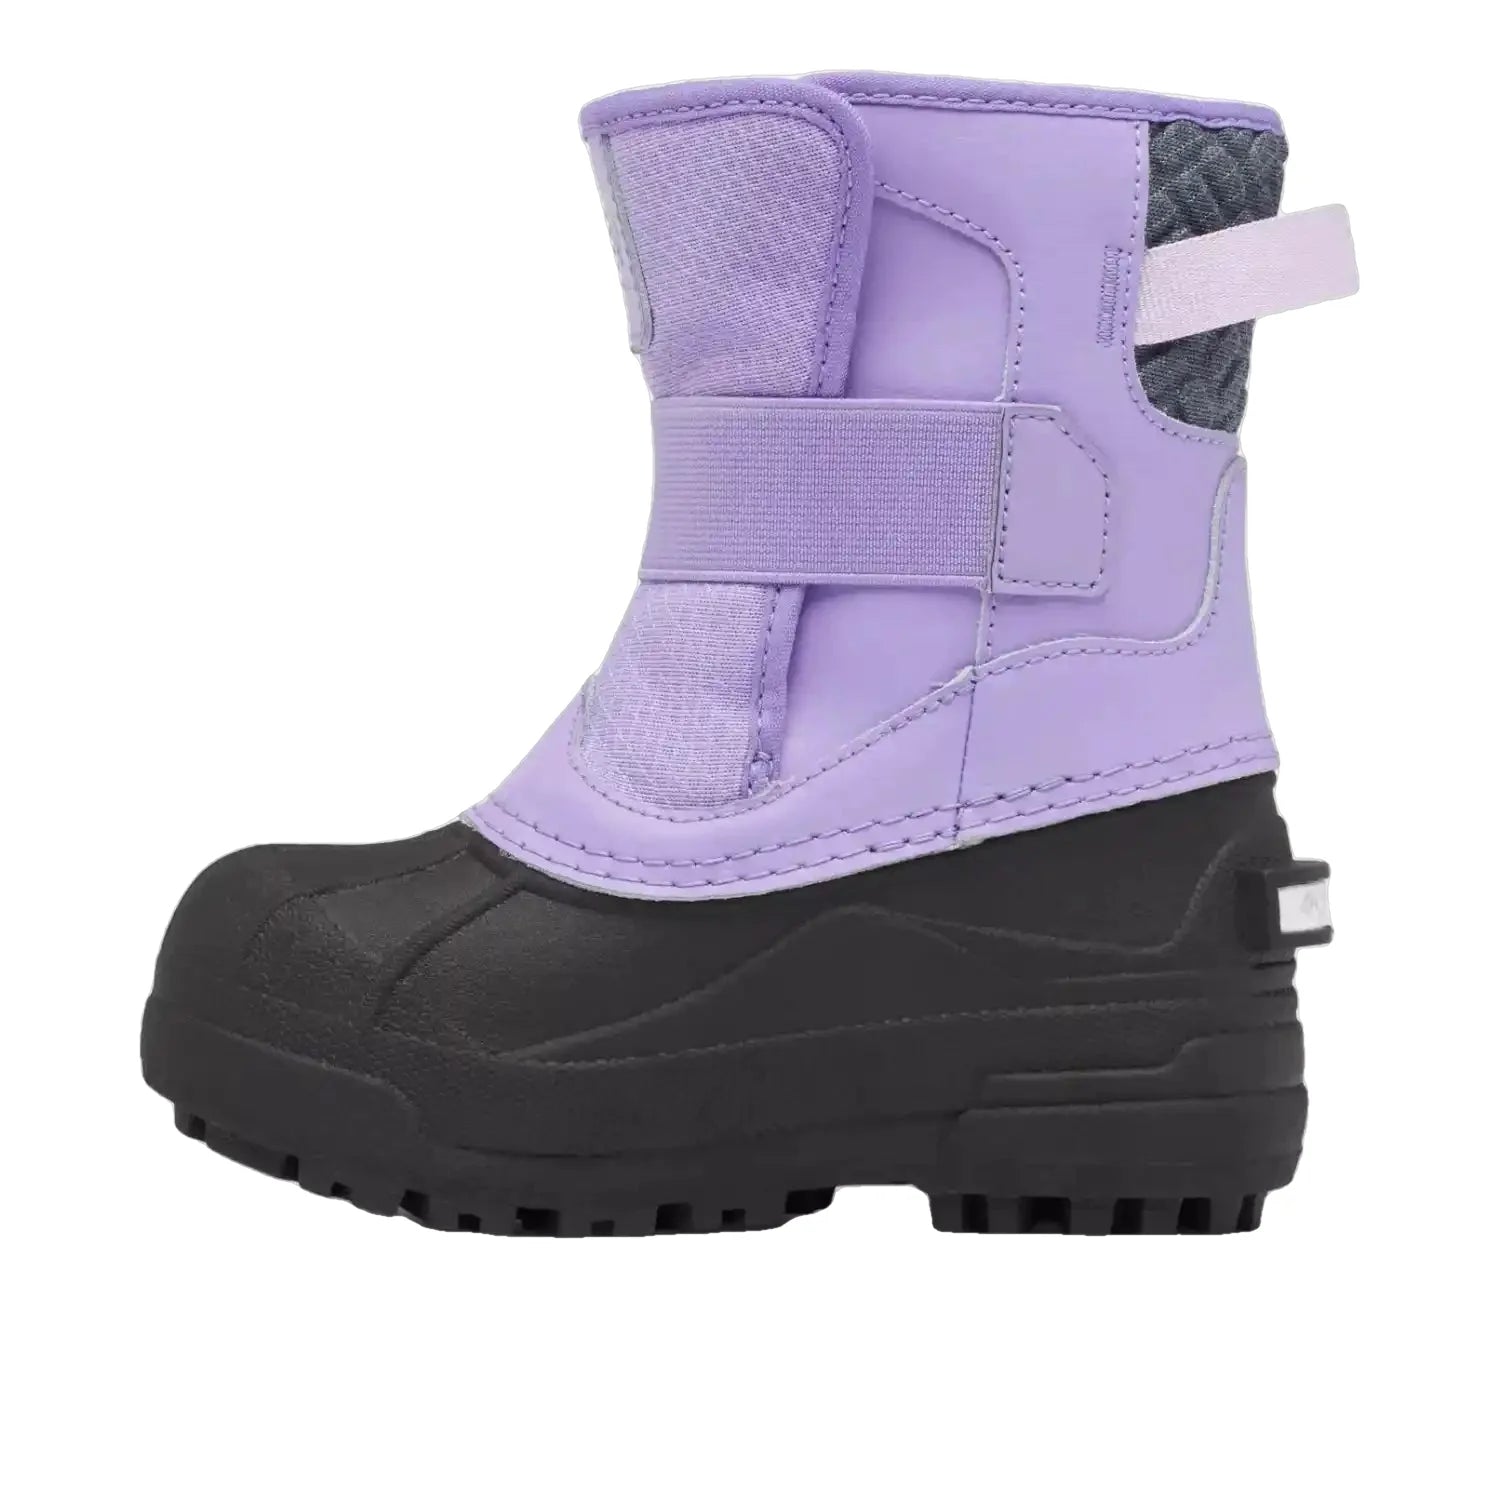 Toddler Bugaboot Celsius Strap Boot in Paisley Purple. Interior View.